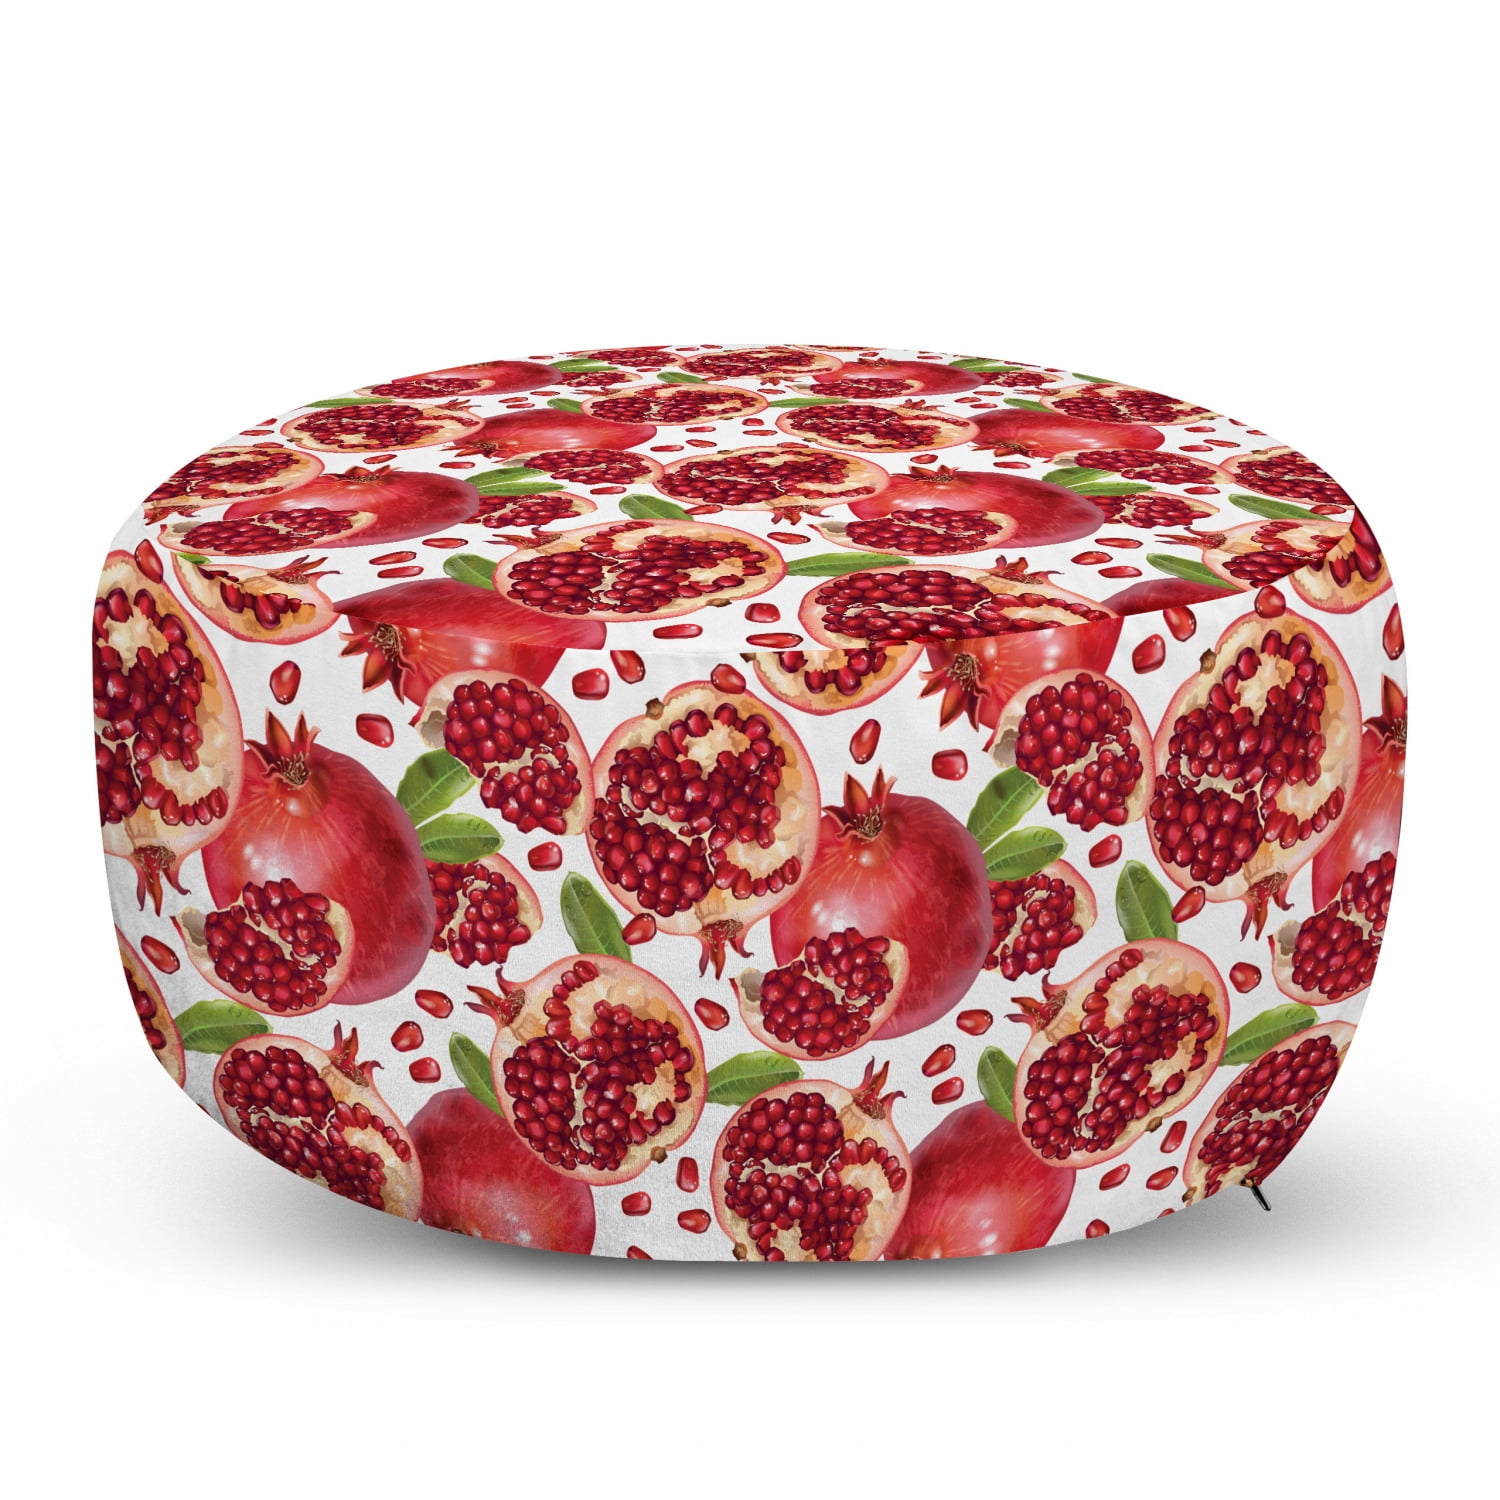 Rhythmic Berries and Leaves Colorful Sketch Pattern on Plain Background Burnt Sienna White Ambesonne Strawberry Rectangle Pouf Under Desk Foot Stool for Living Room Office Ottoman with Cover 25